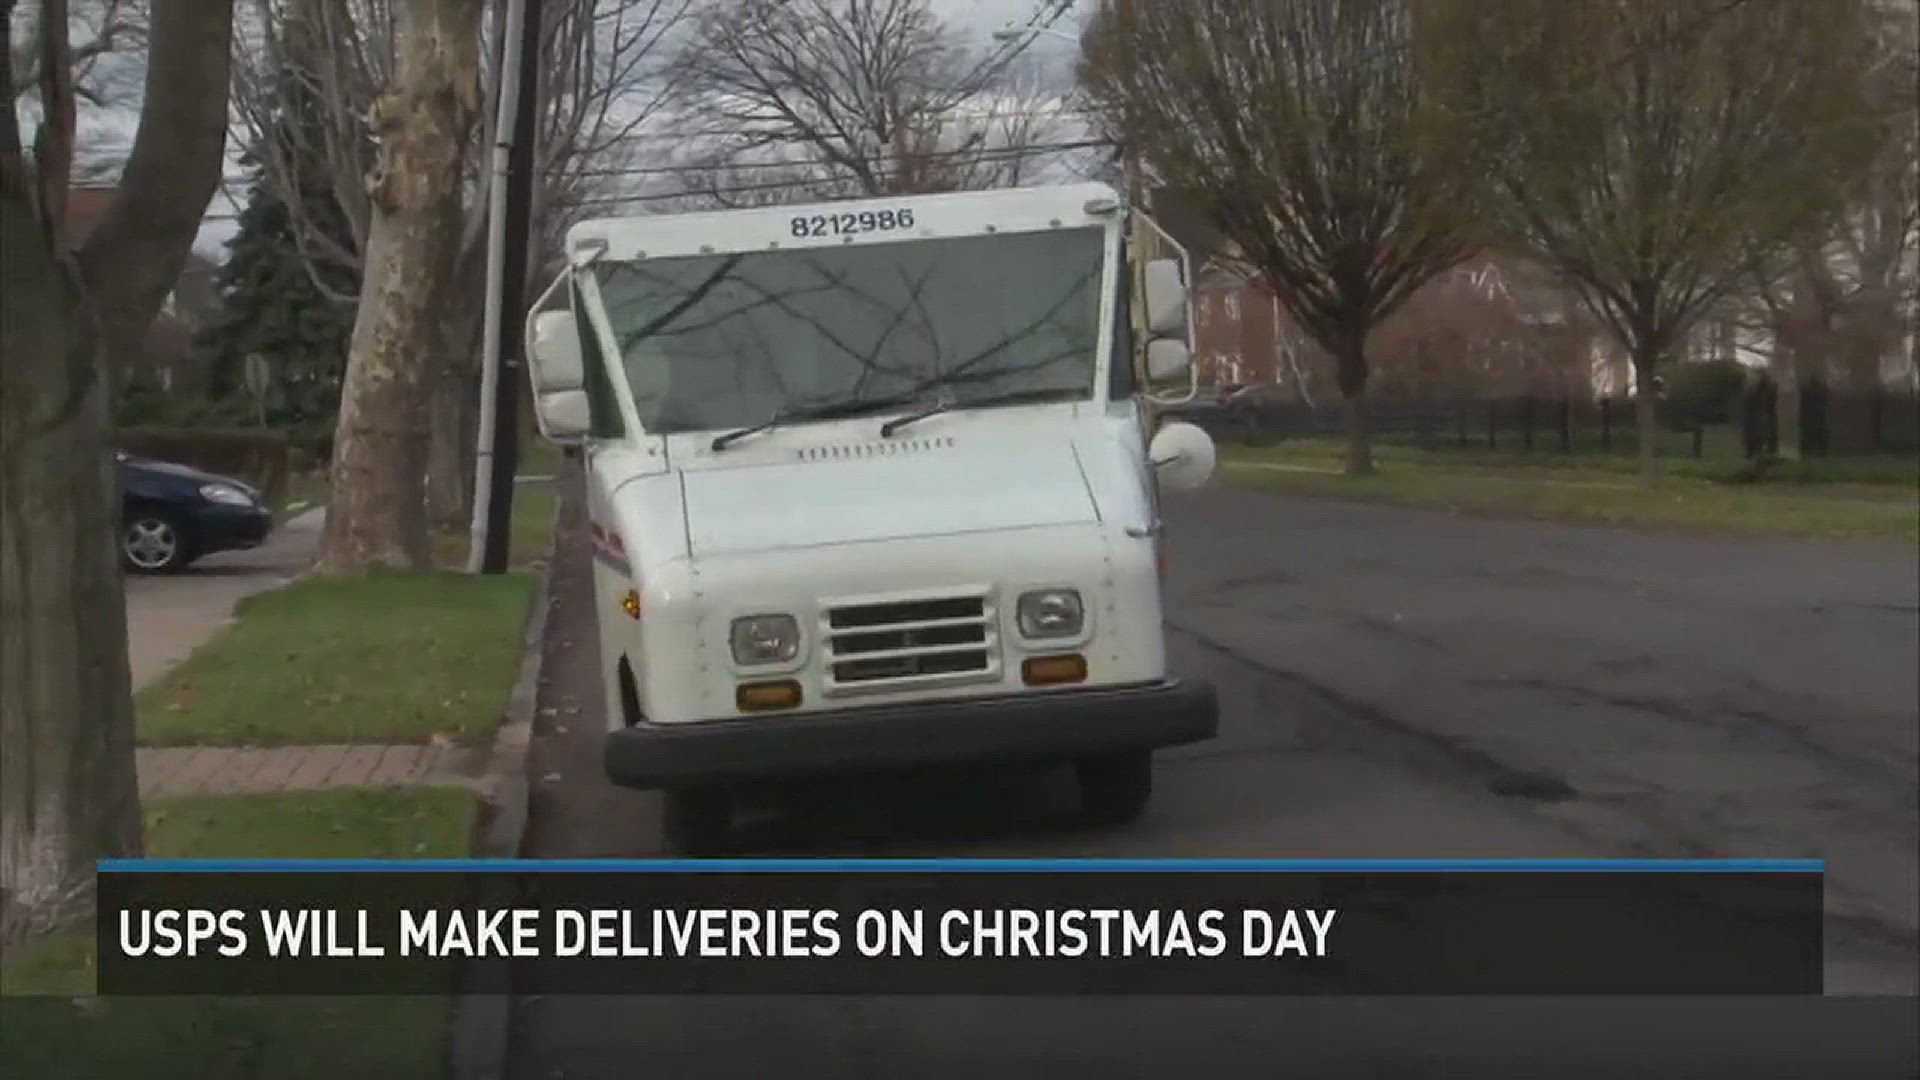 The USPS will deliver express packages on Christmas day. Normal business hours resume on Tuesday the 27th.